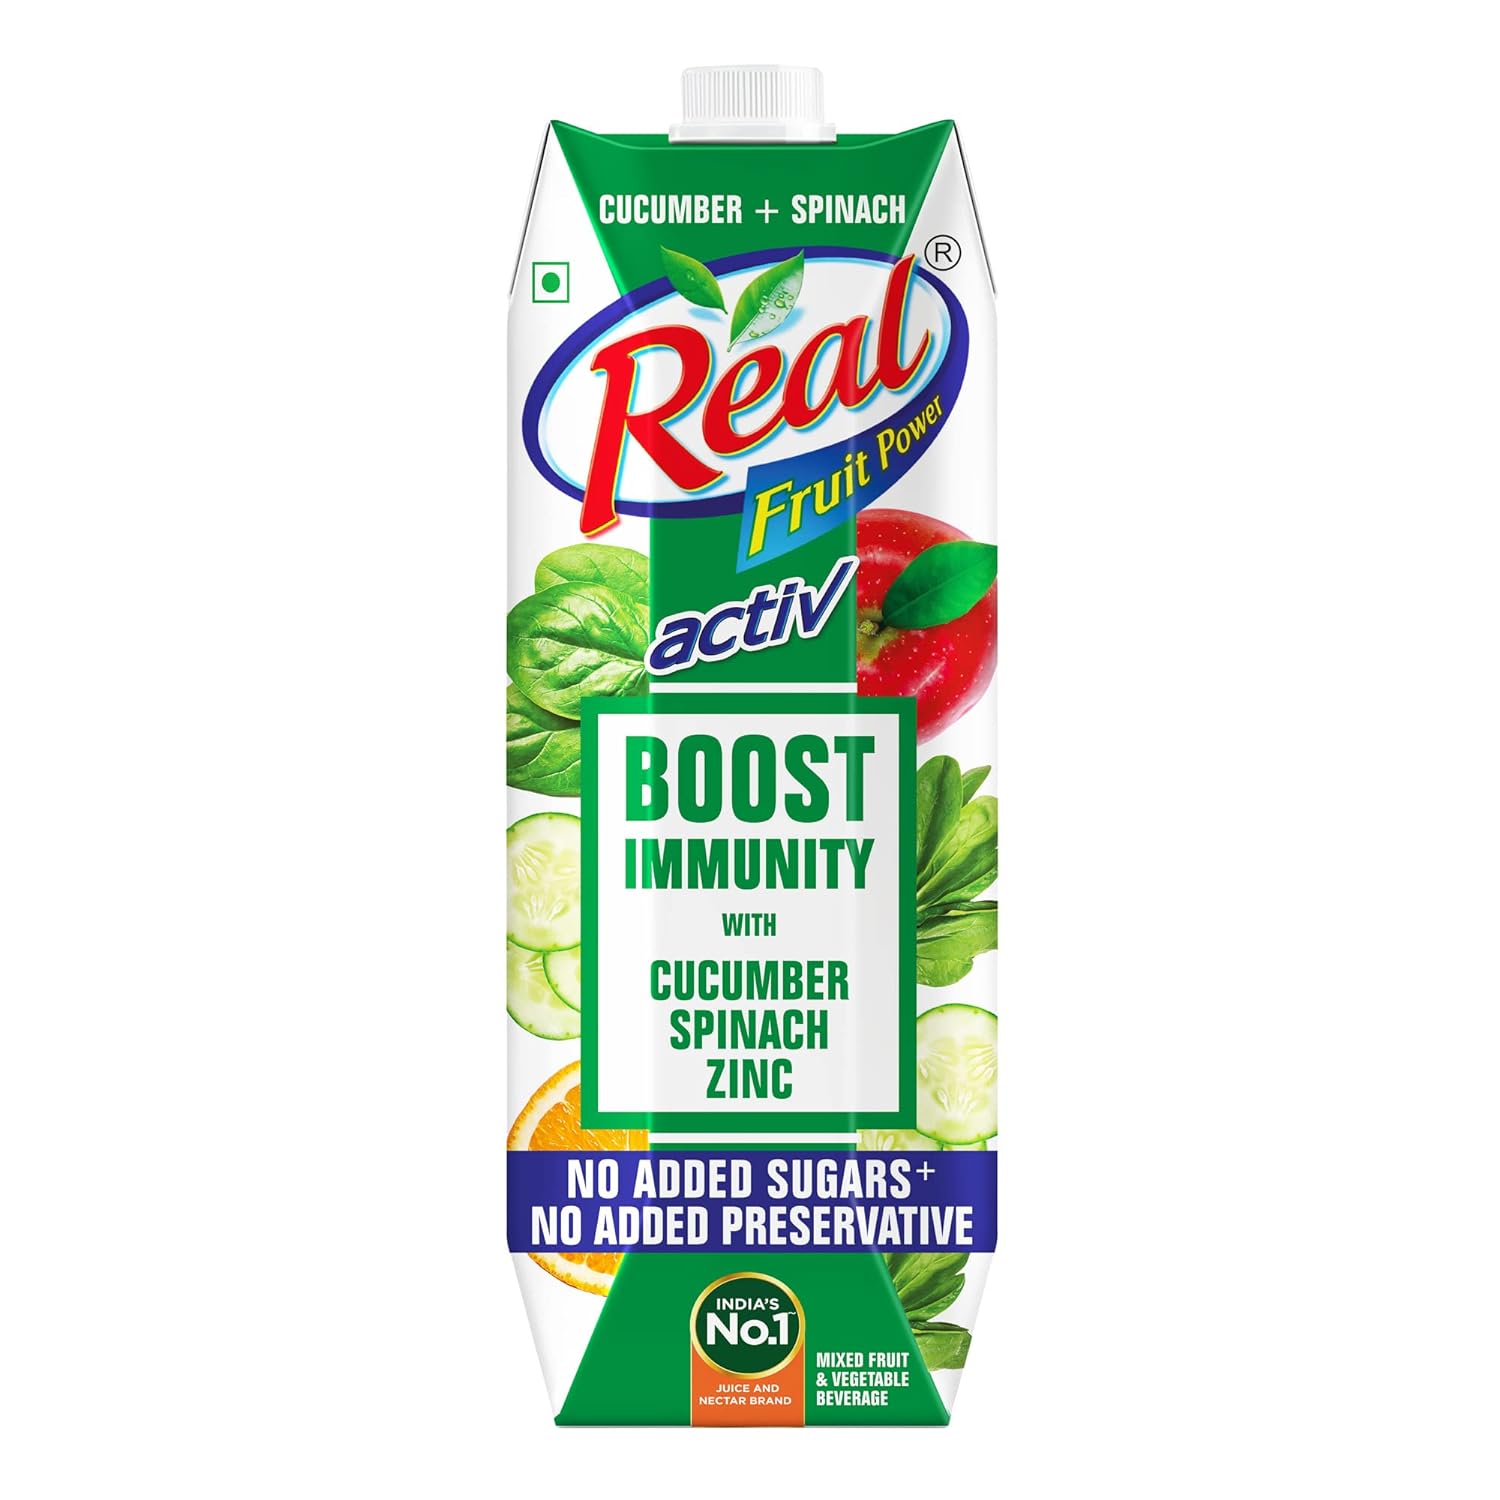 Real Activ Cucumber Spinach Fruit Juice - 1L | No Added Sugars, No Added Preservatives | Helps Boosts Immunity | Mix Fruit & Vegetable Juice with Added Zinc | Tasty, Healthy & Refreshing Fruit Drink